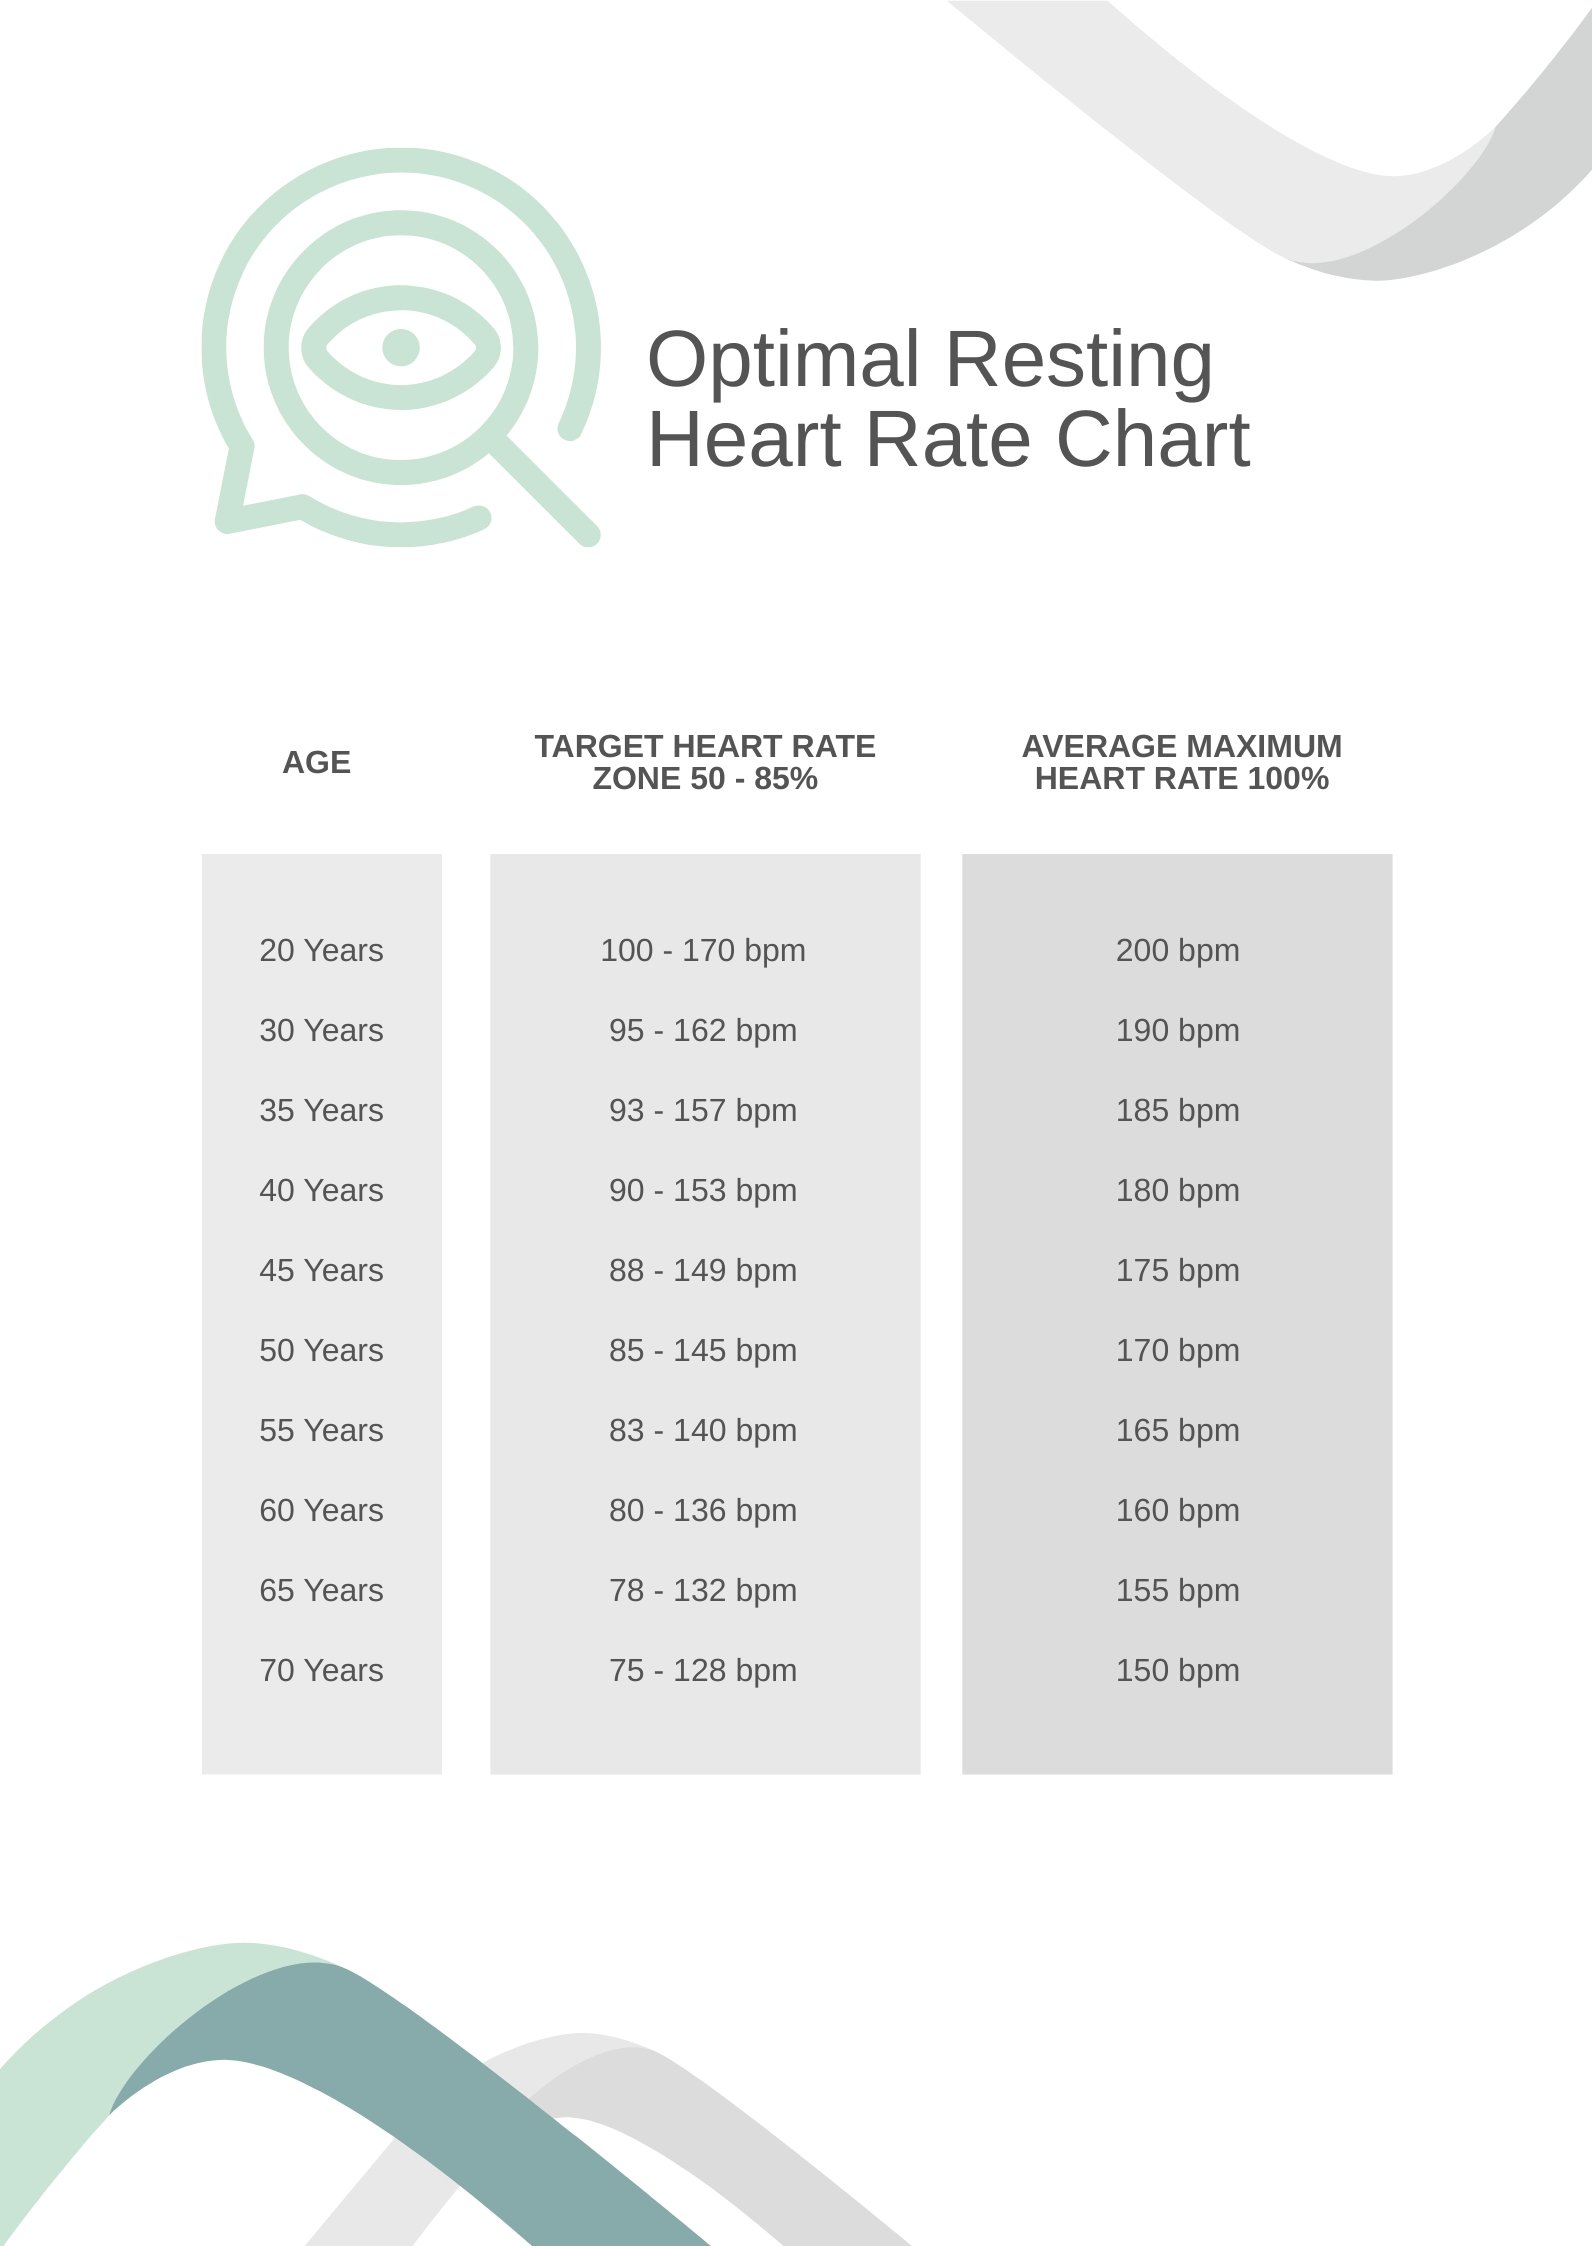 Optimal Resting Heart Rate Chart in PDF